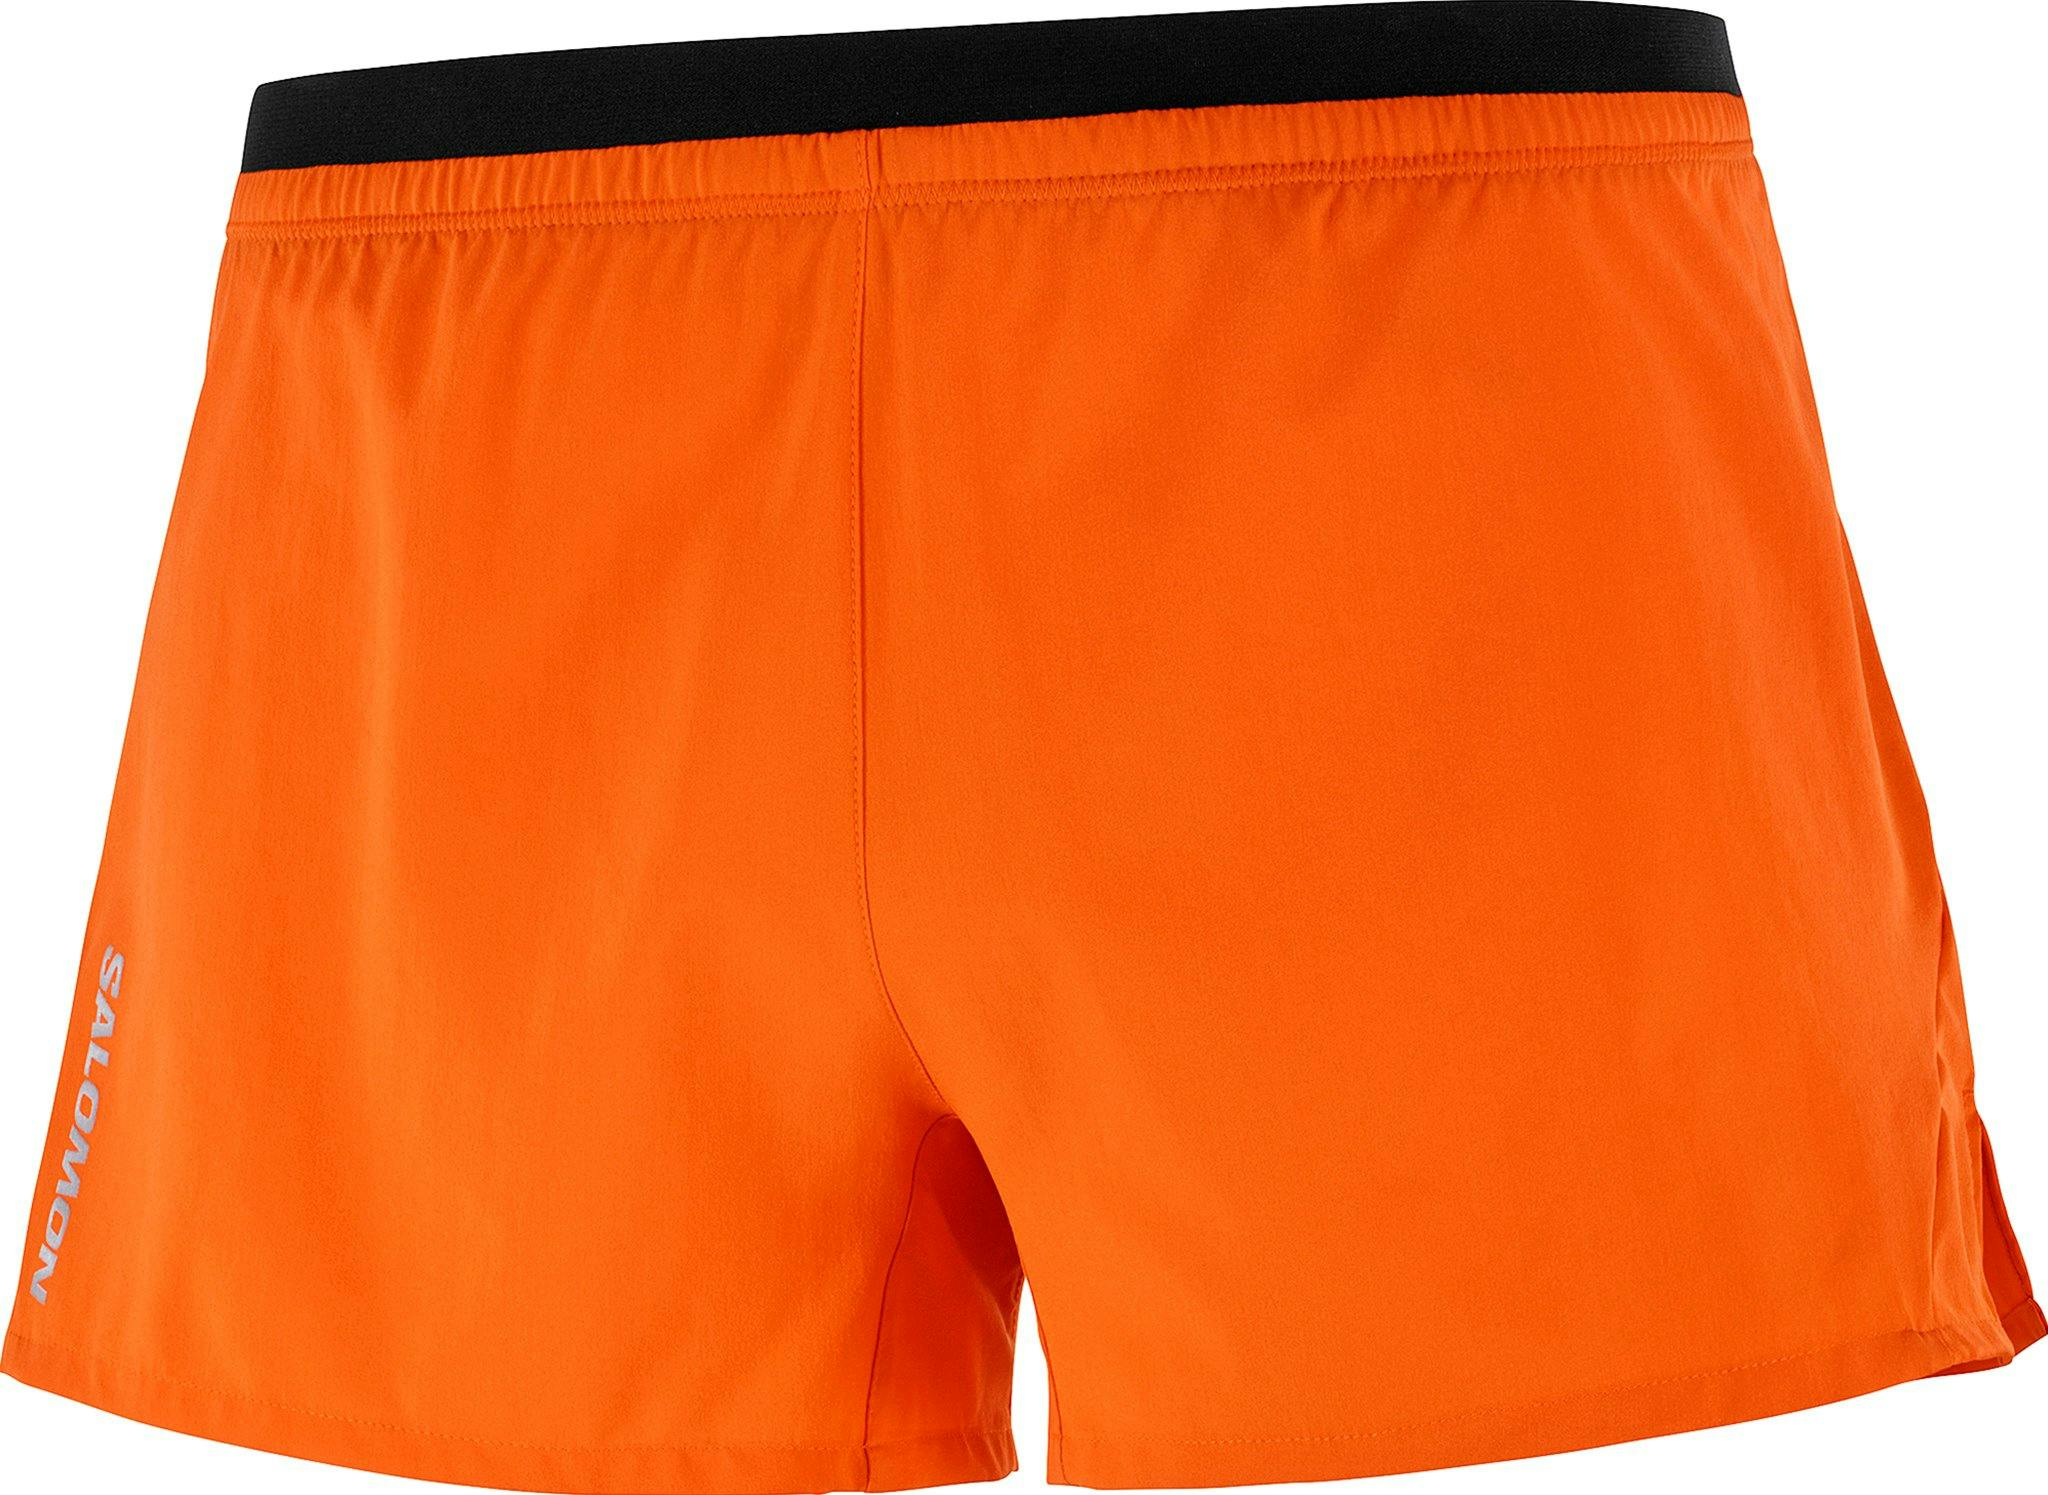 Product image for Cross 3 In Shorts - Men's